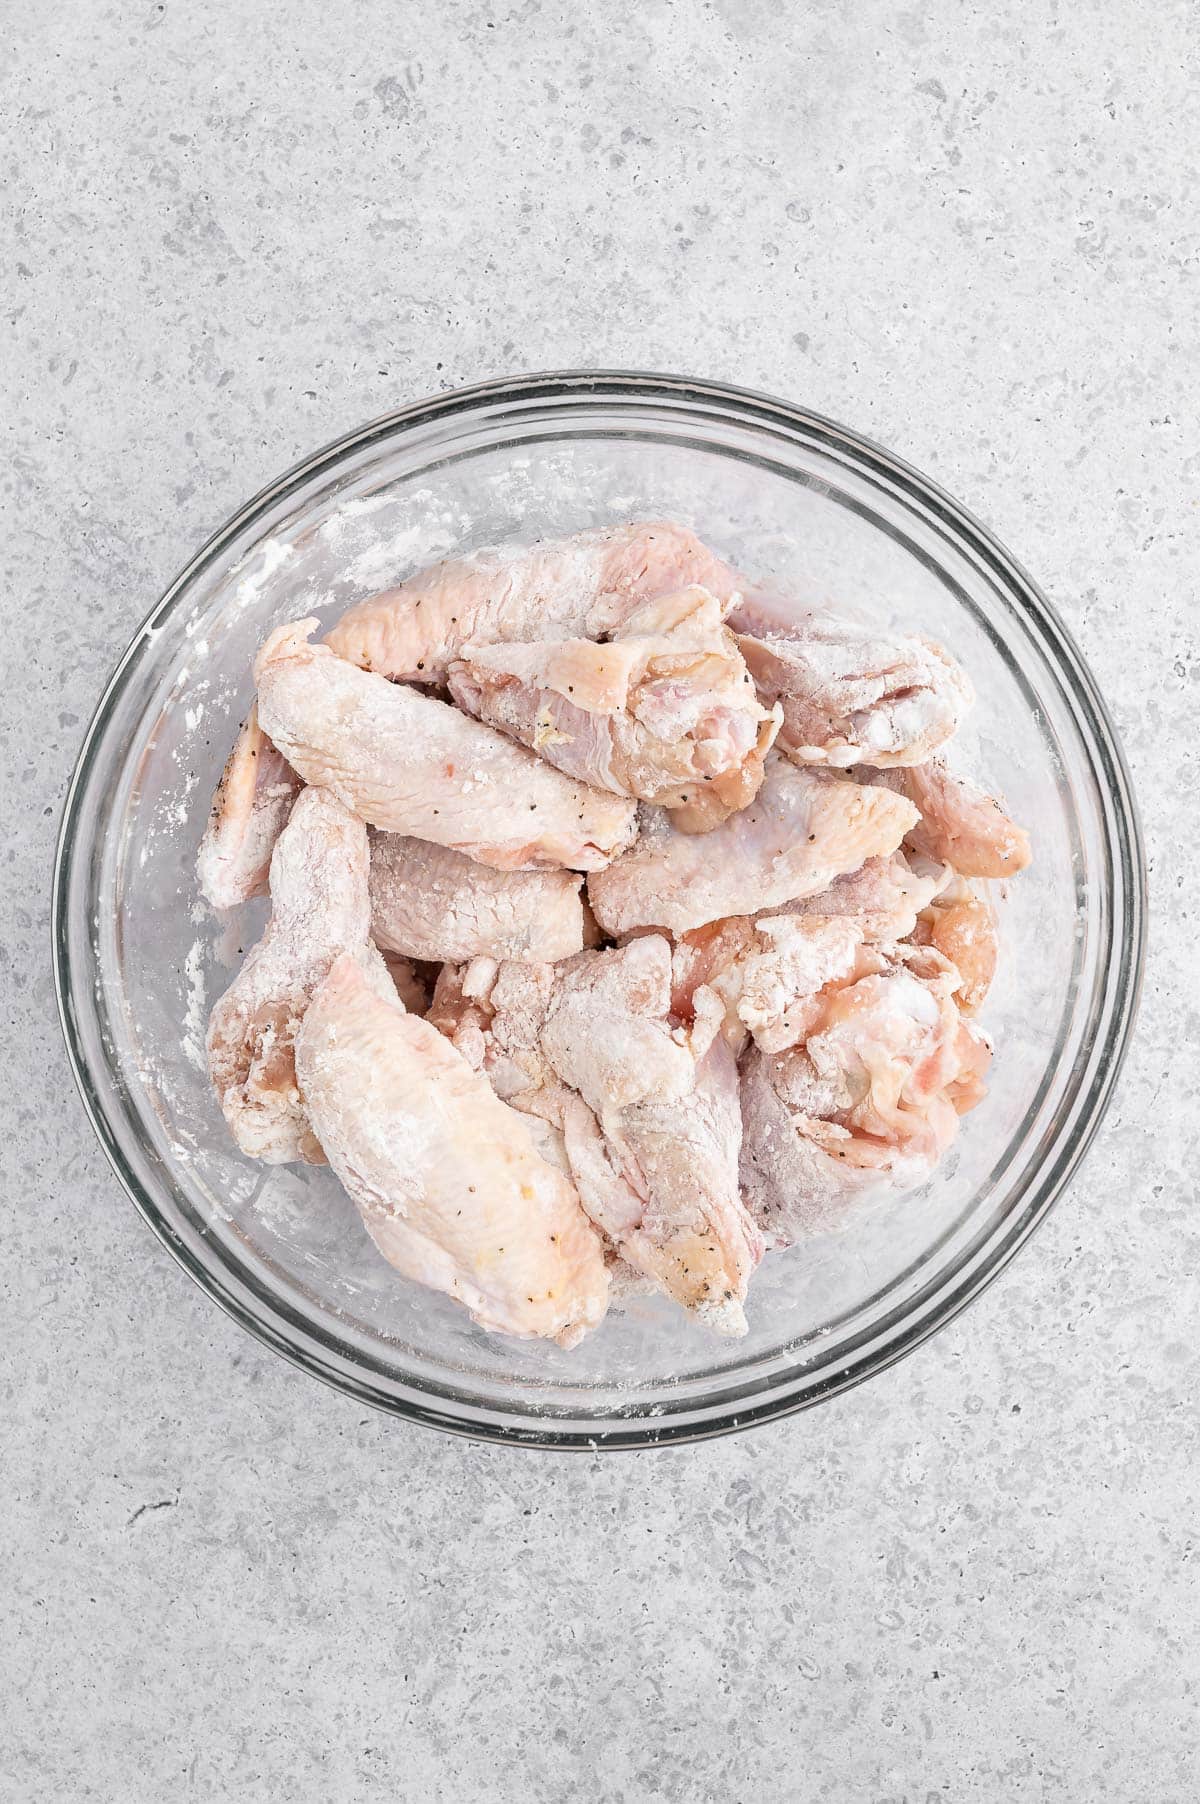 raw chicken wings in a glass bowl coated with cornstarch and seasonings